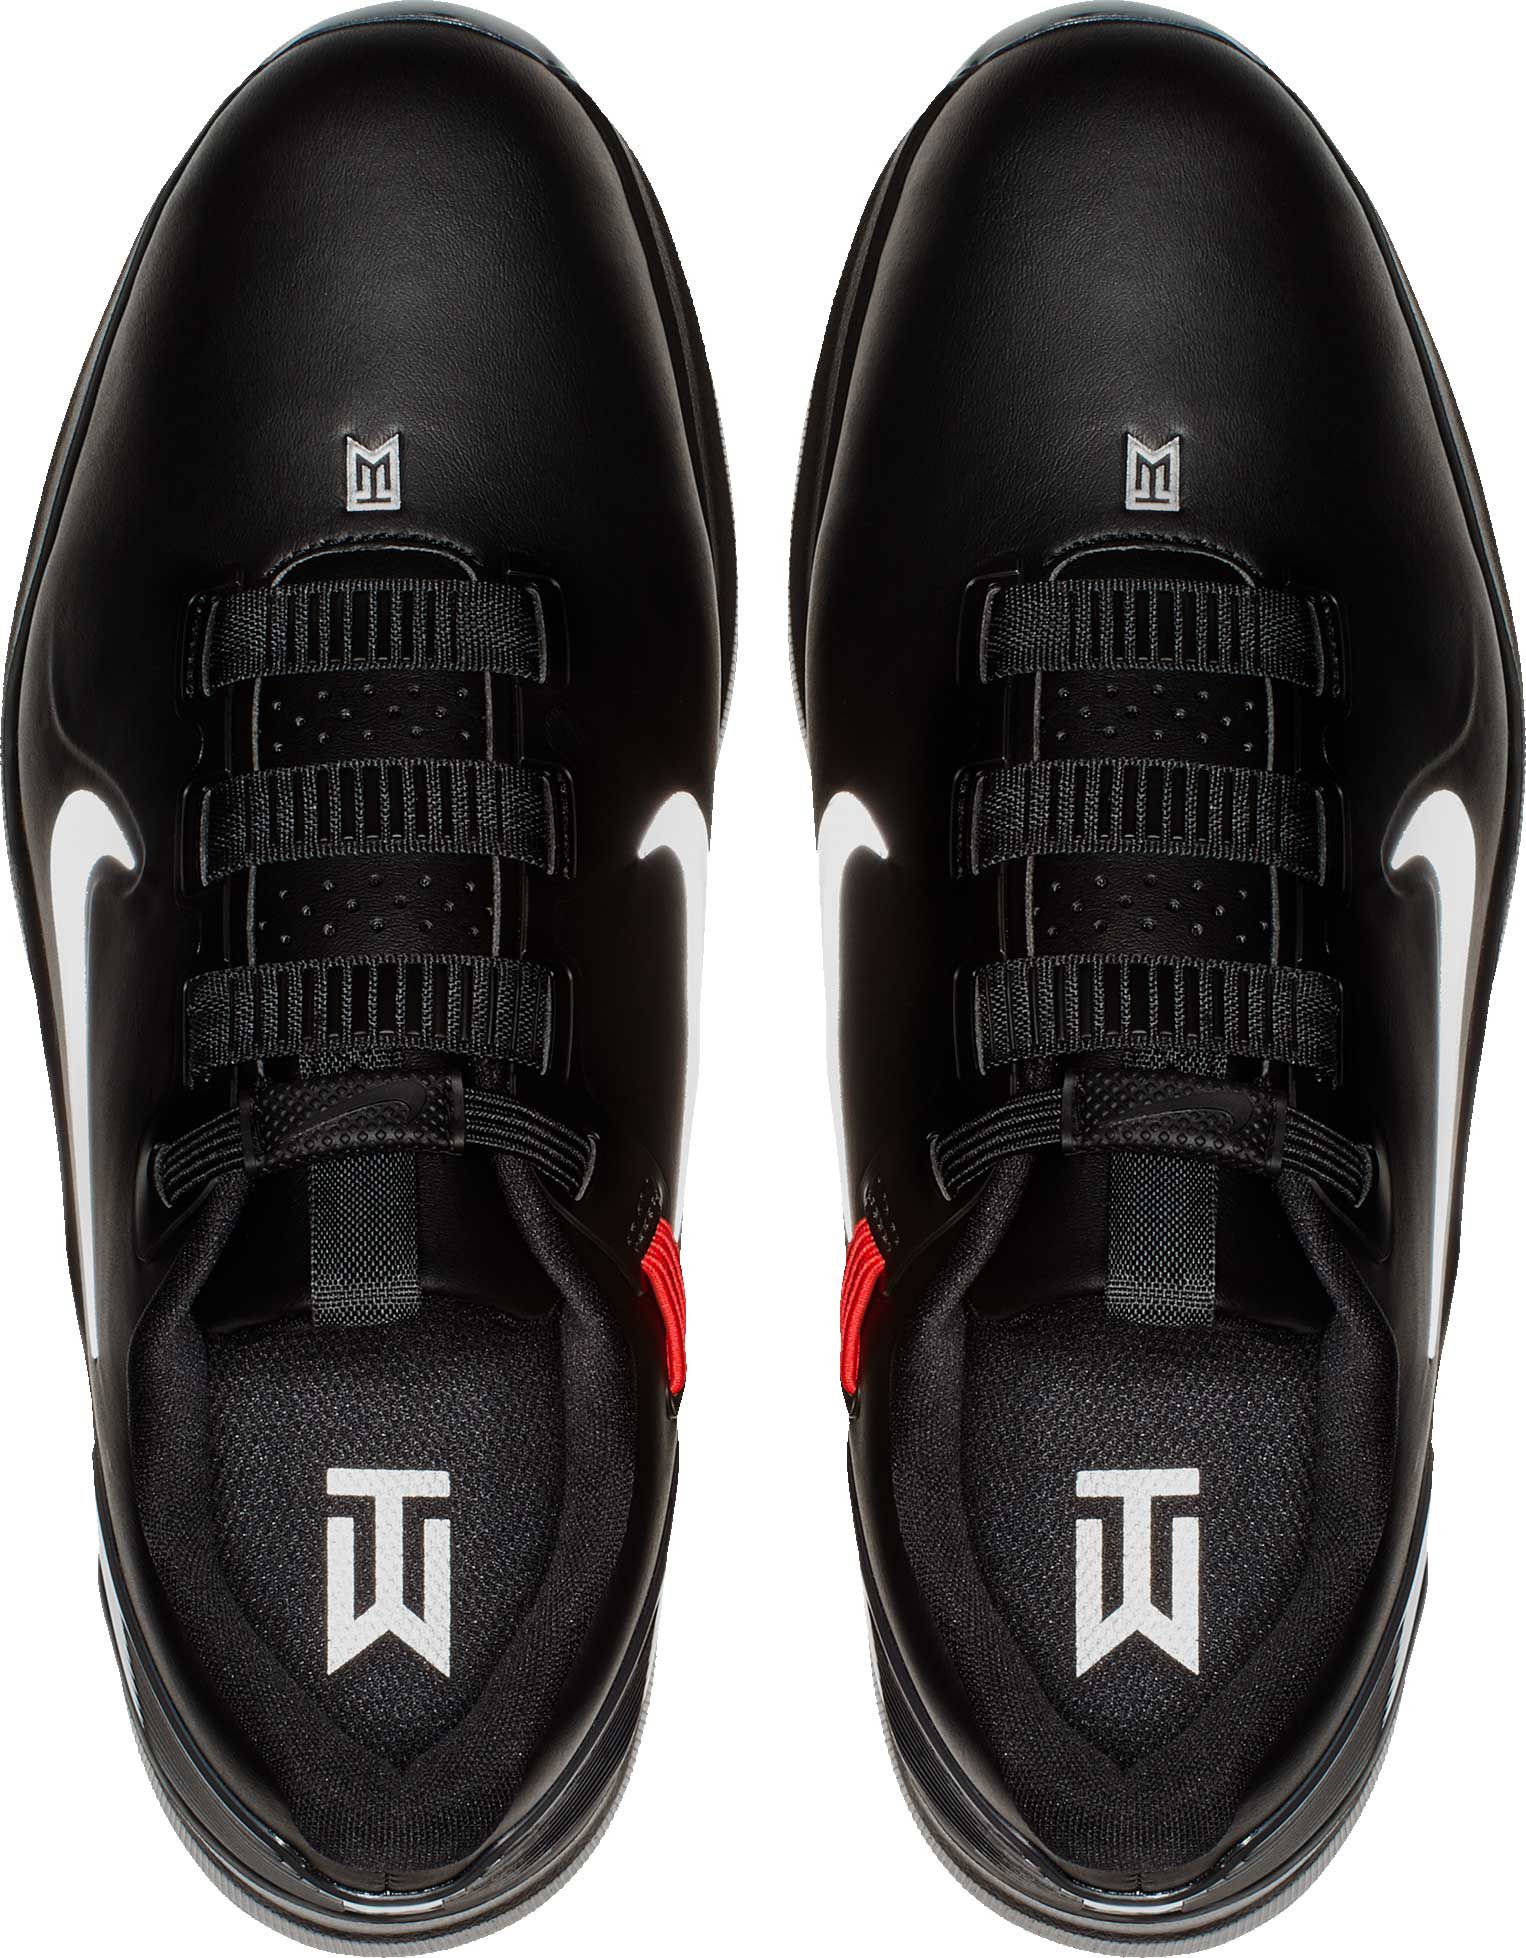 tw71 fastfit golf shoes